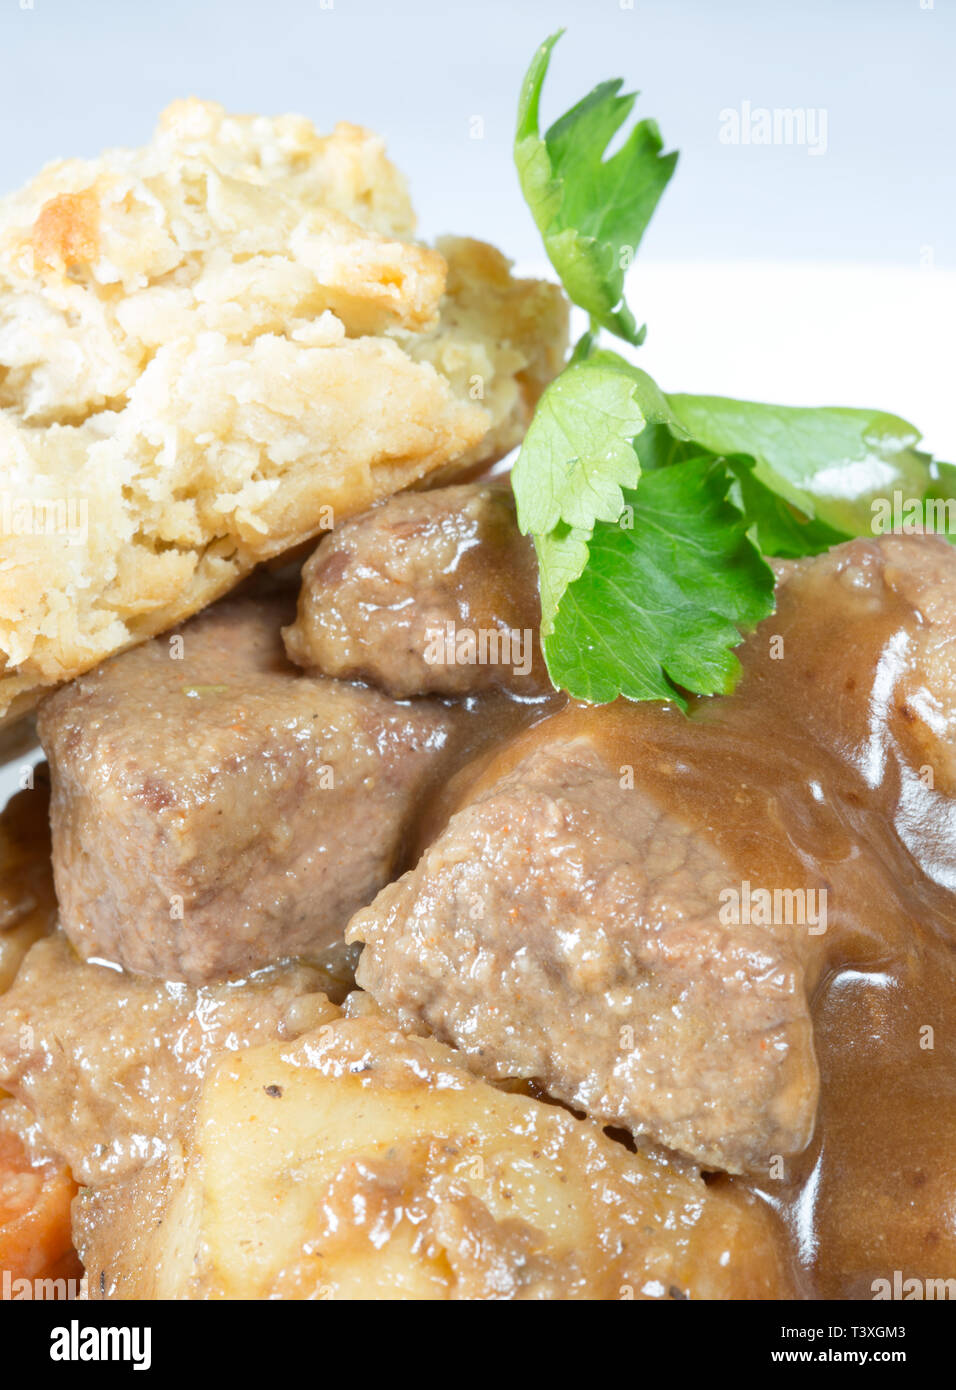 A classic plate of Beef stew served with a suet dumpling Stock Photo